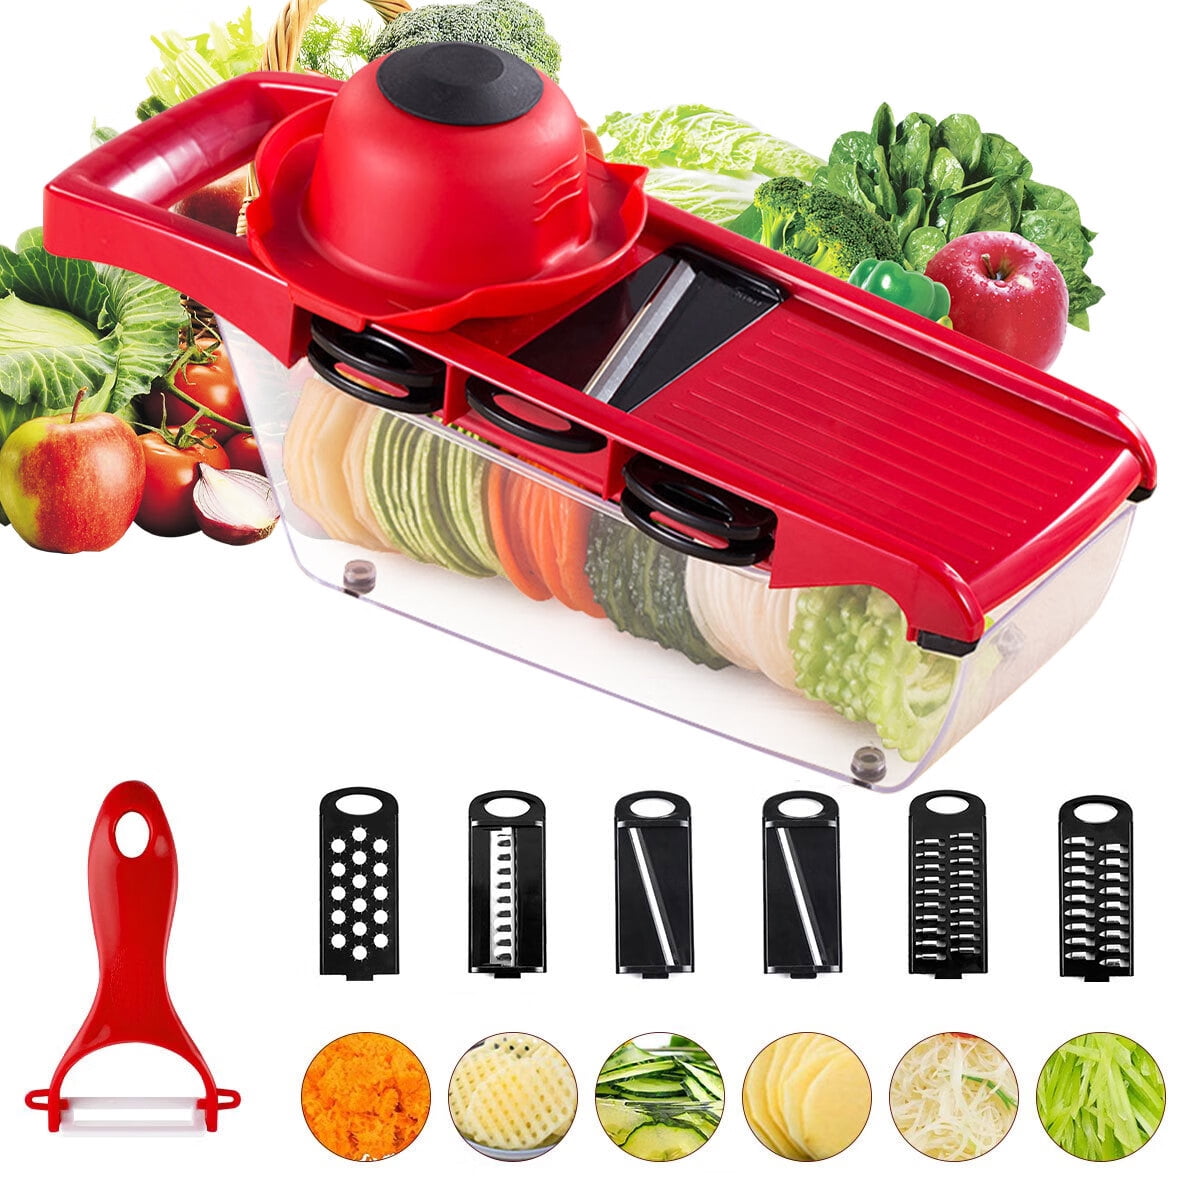 6-in-1 Vegetable Chopper Food Cutter Onion Slicer with Container